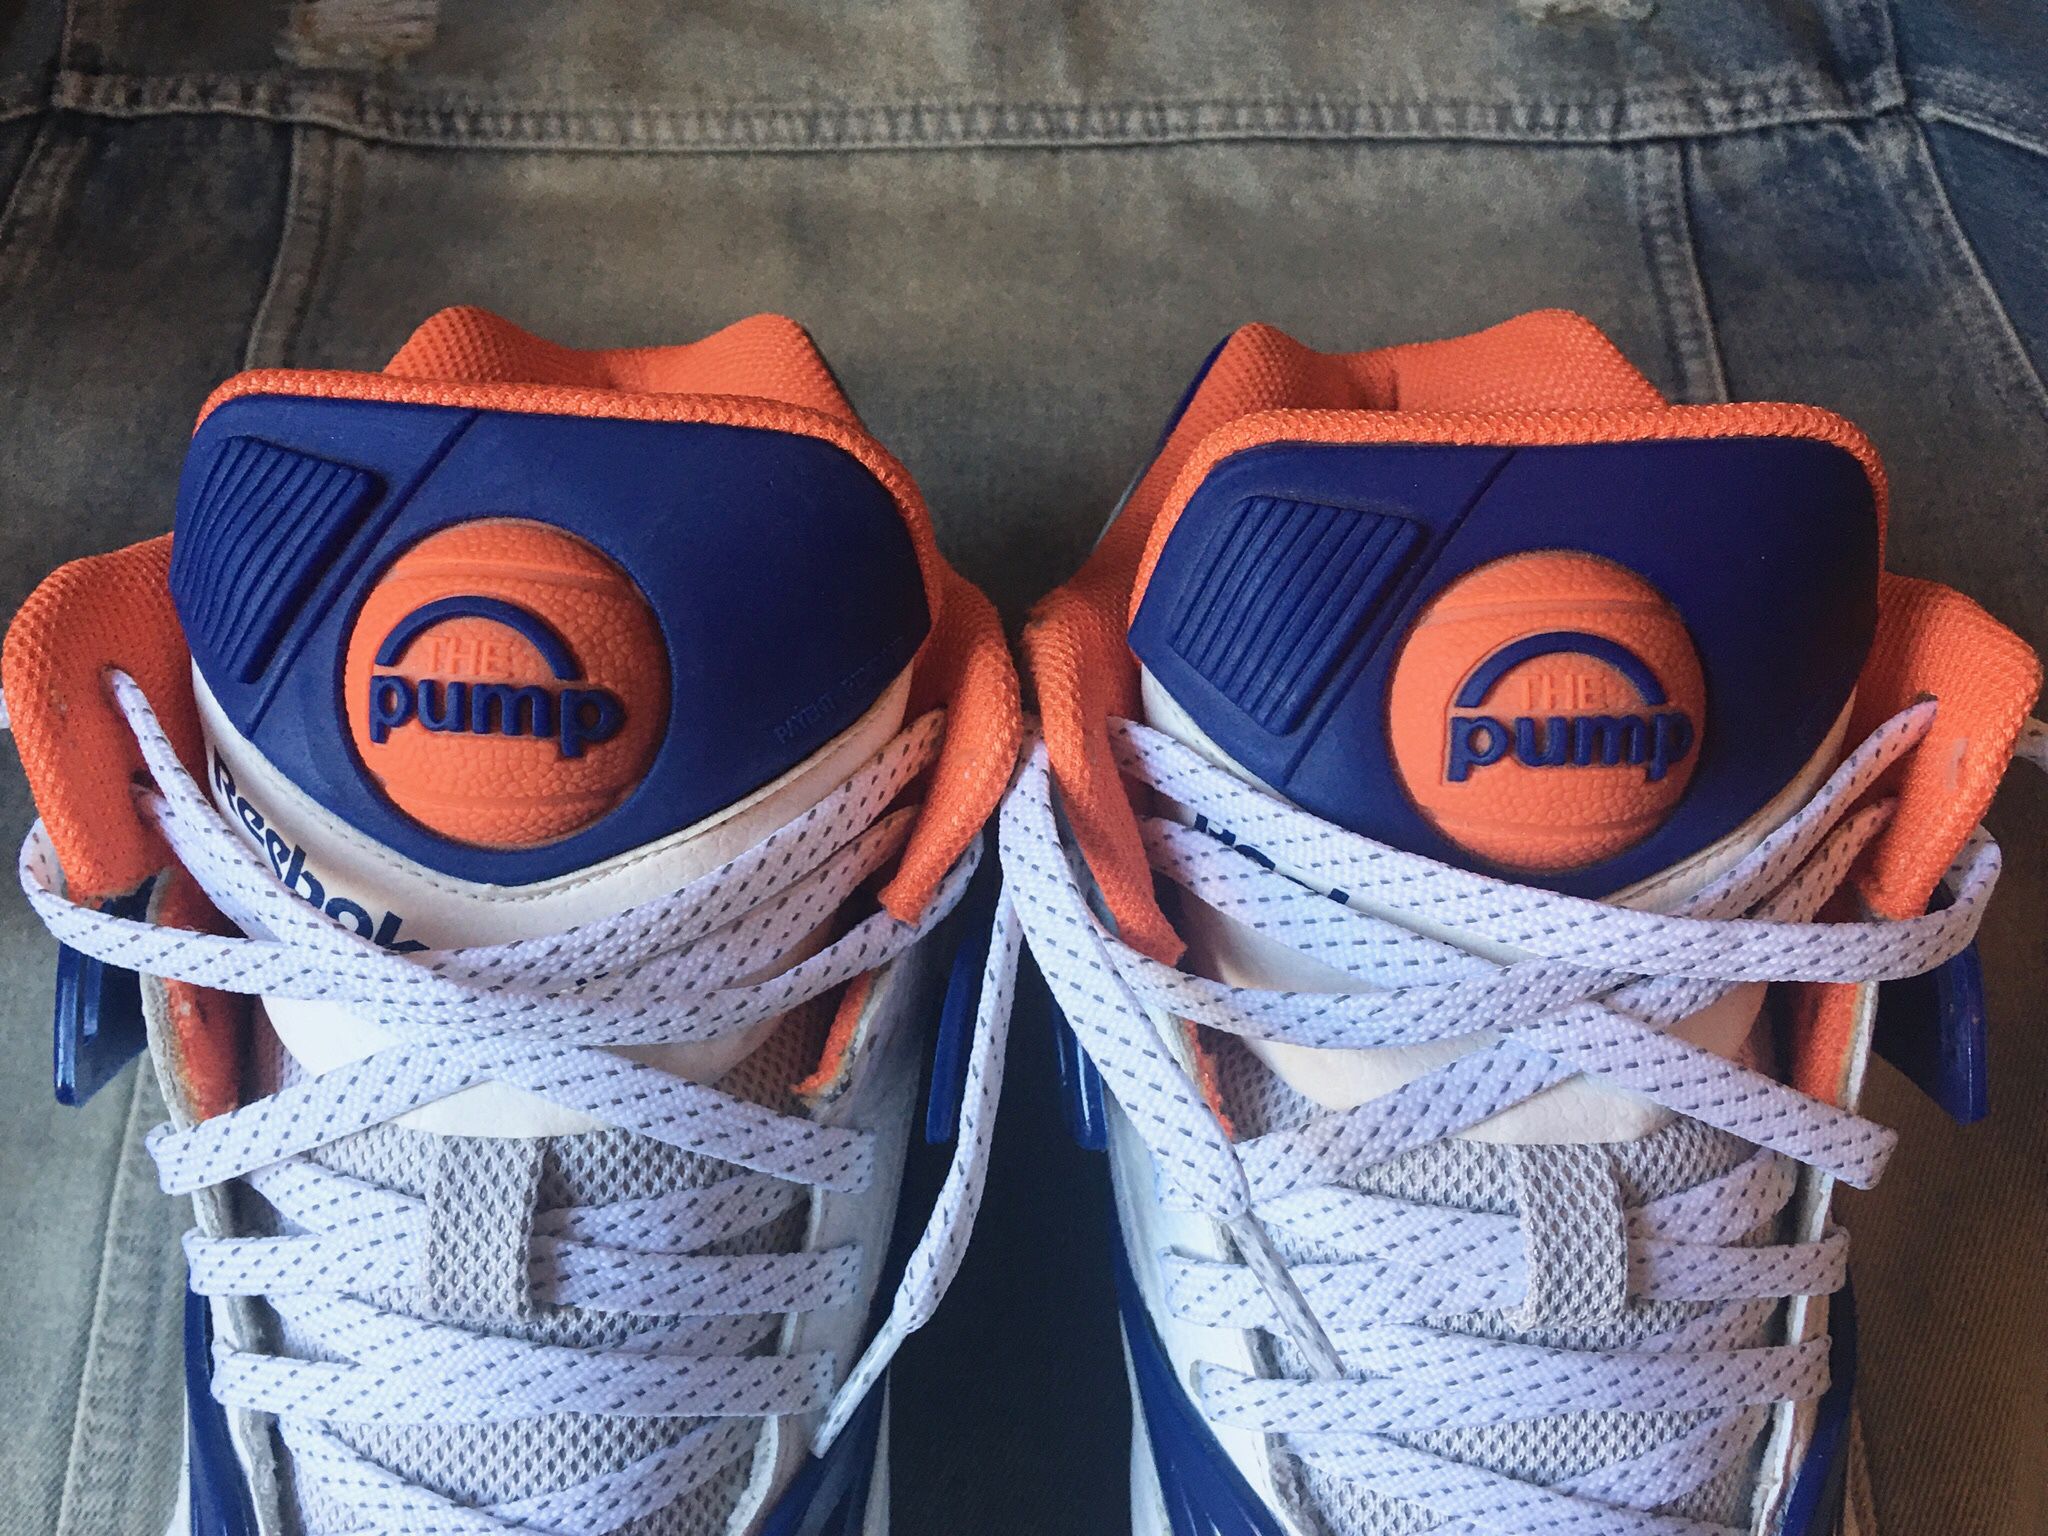 SALE !! Vintage Reebok Omni Pump (Knicks): Size 9.5 EXTREMELY RARE! for Sale in Queens, NY - OfferUp